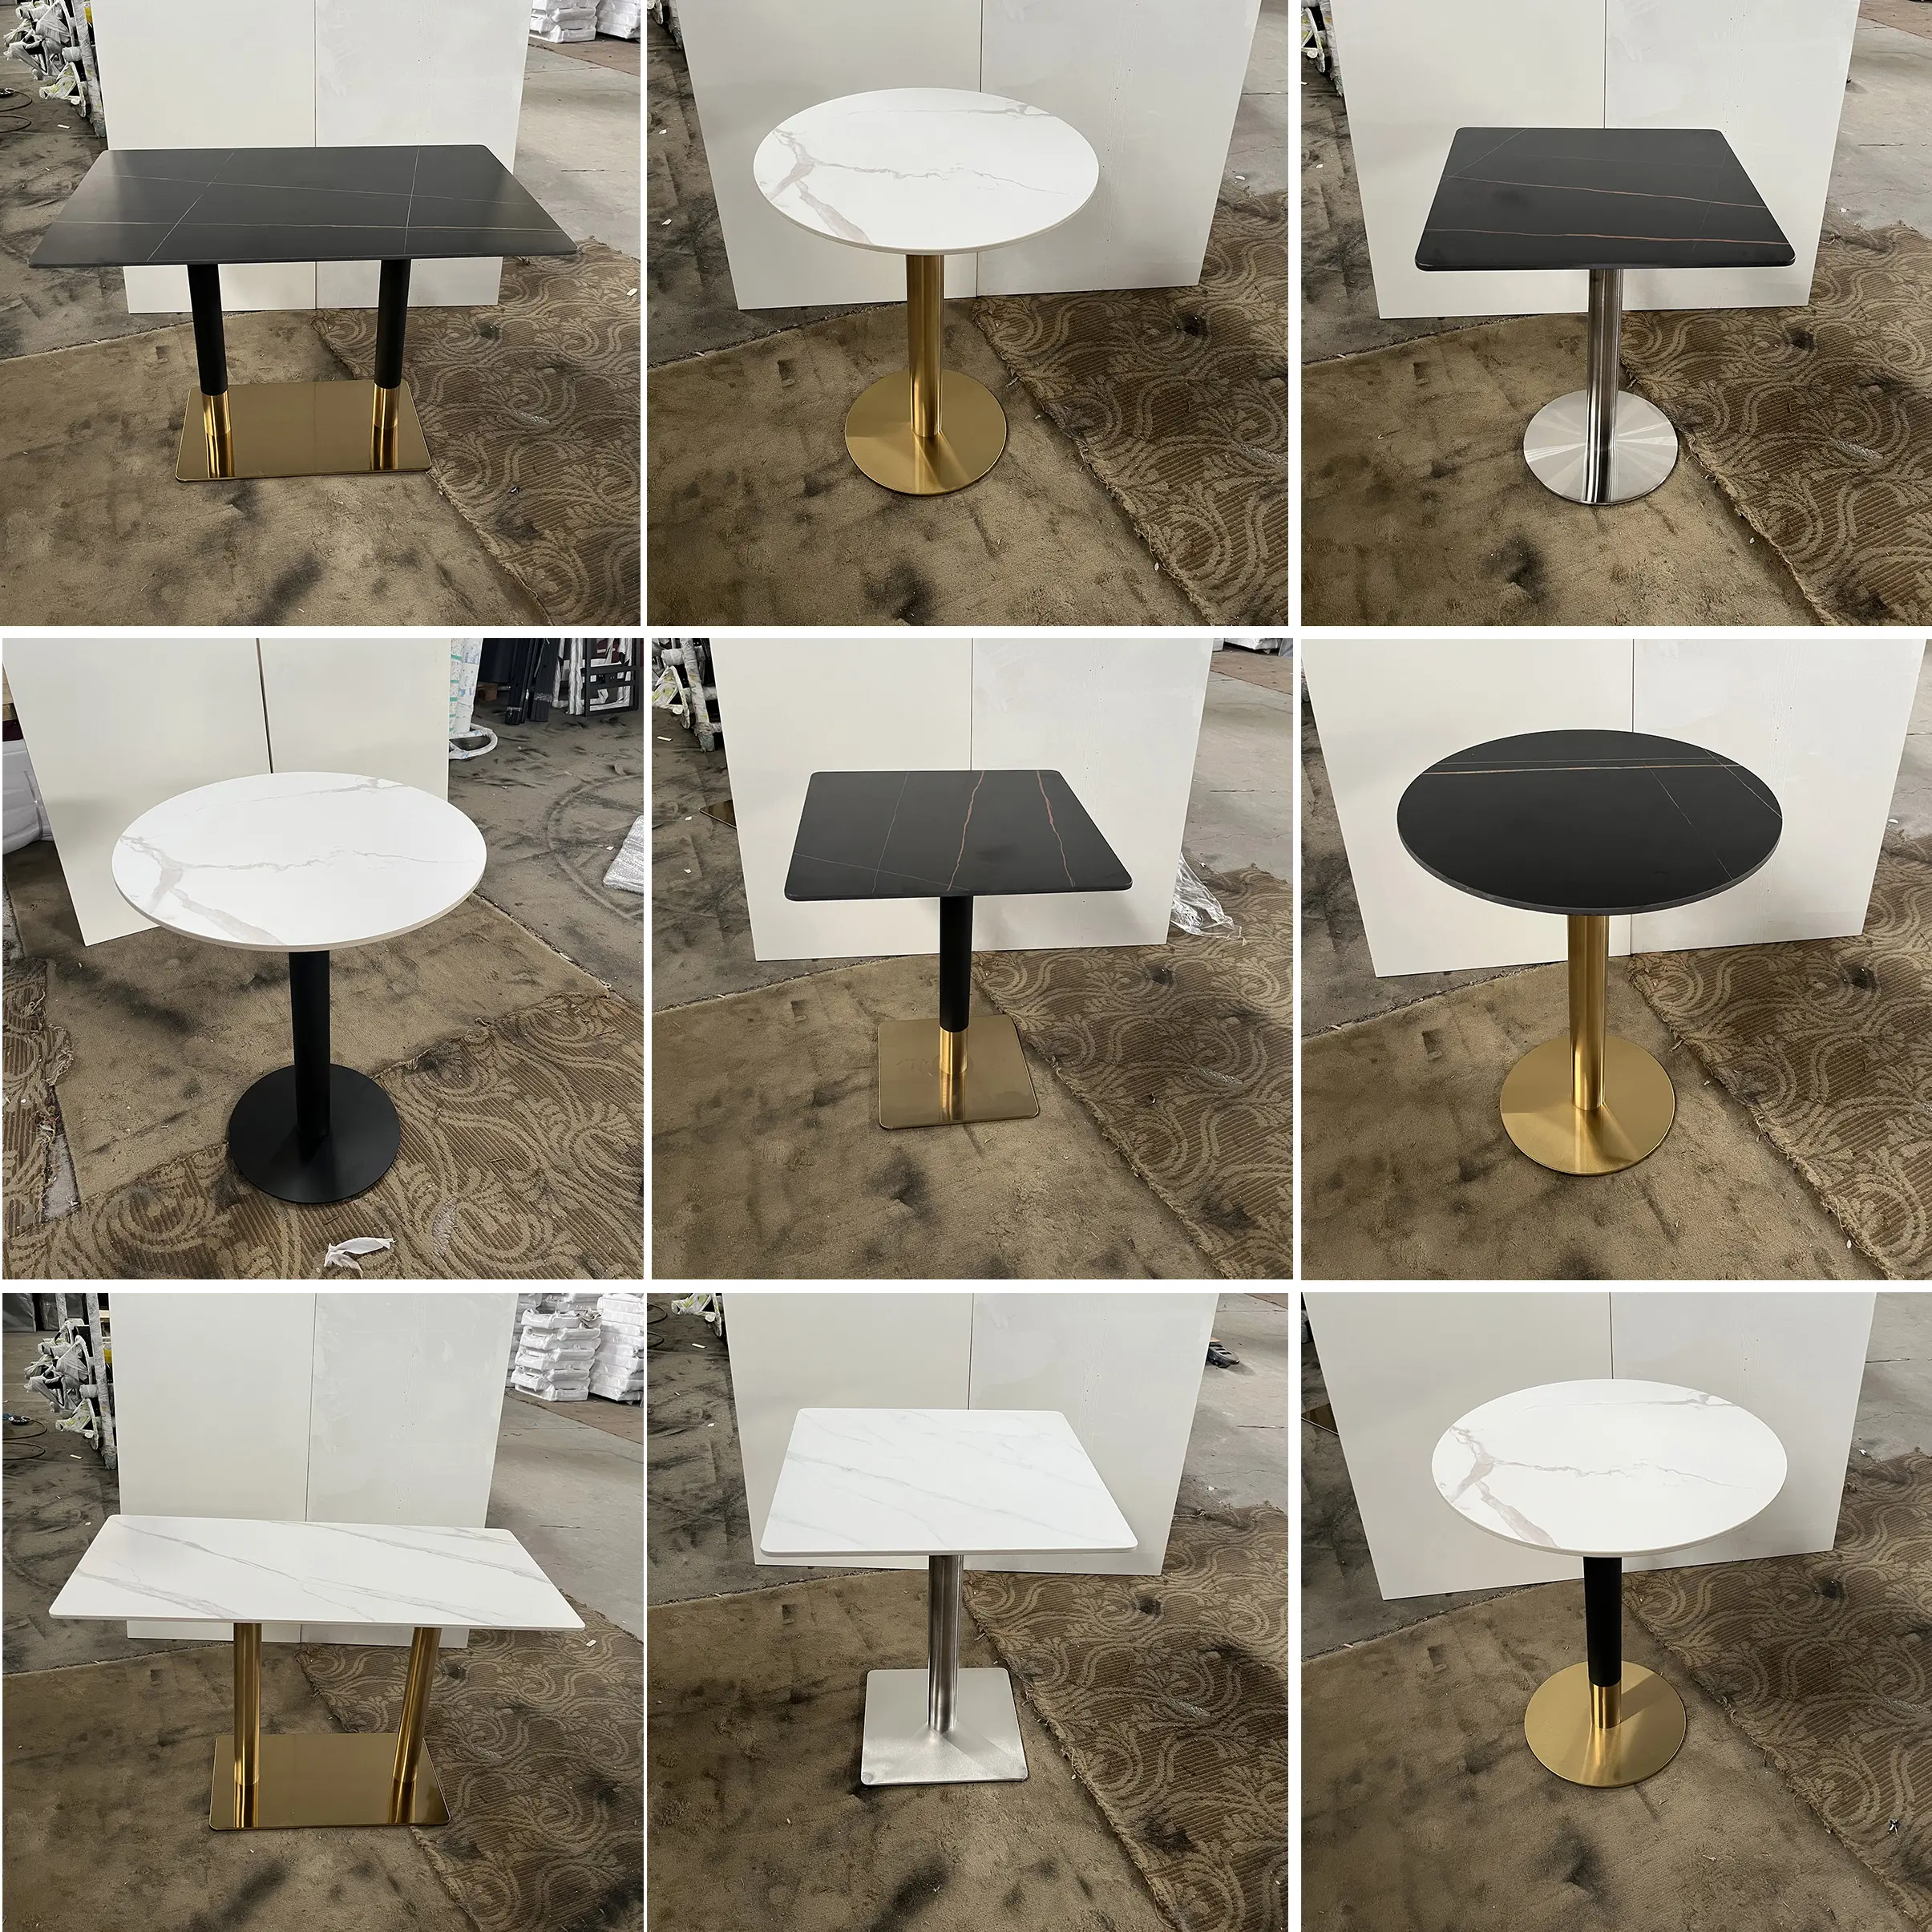 Dining Table And Chair Set Luxury Modern Restaurant Home Dining Room Dinning Table Glass Mdf Wooden Top Round Dining Table Set